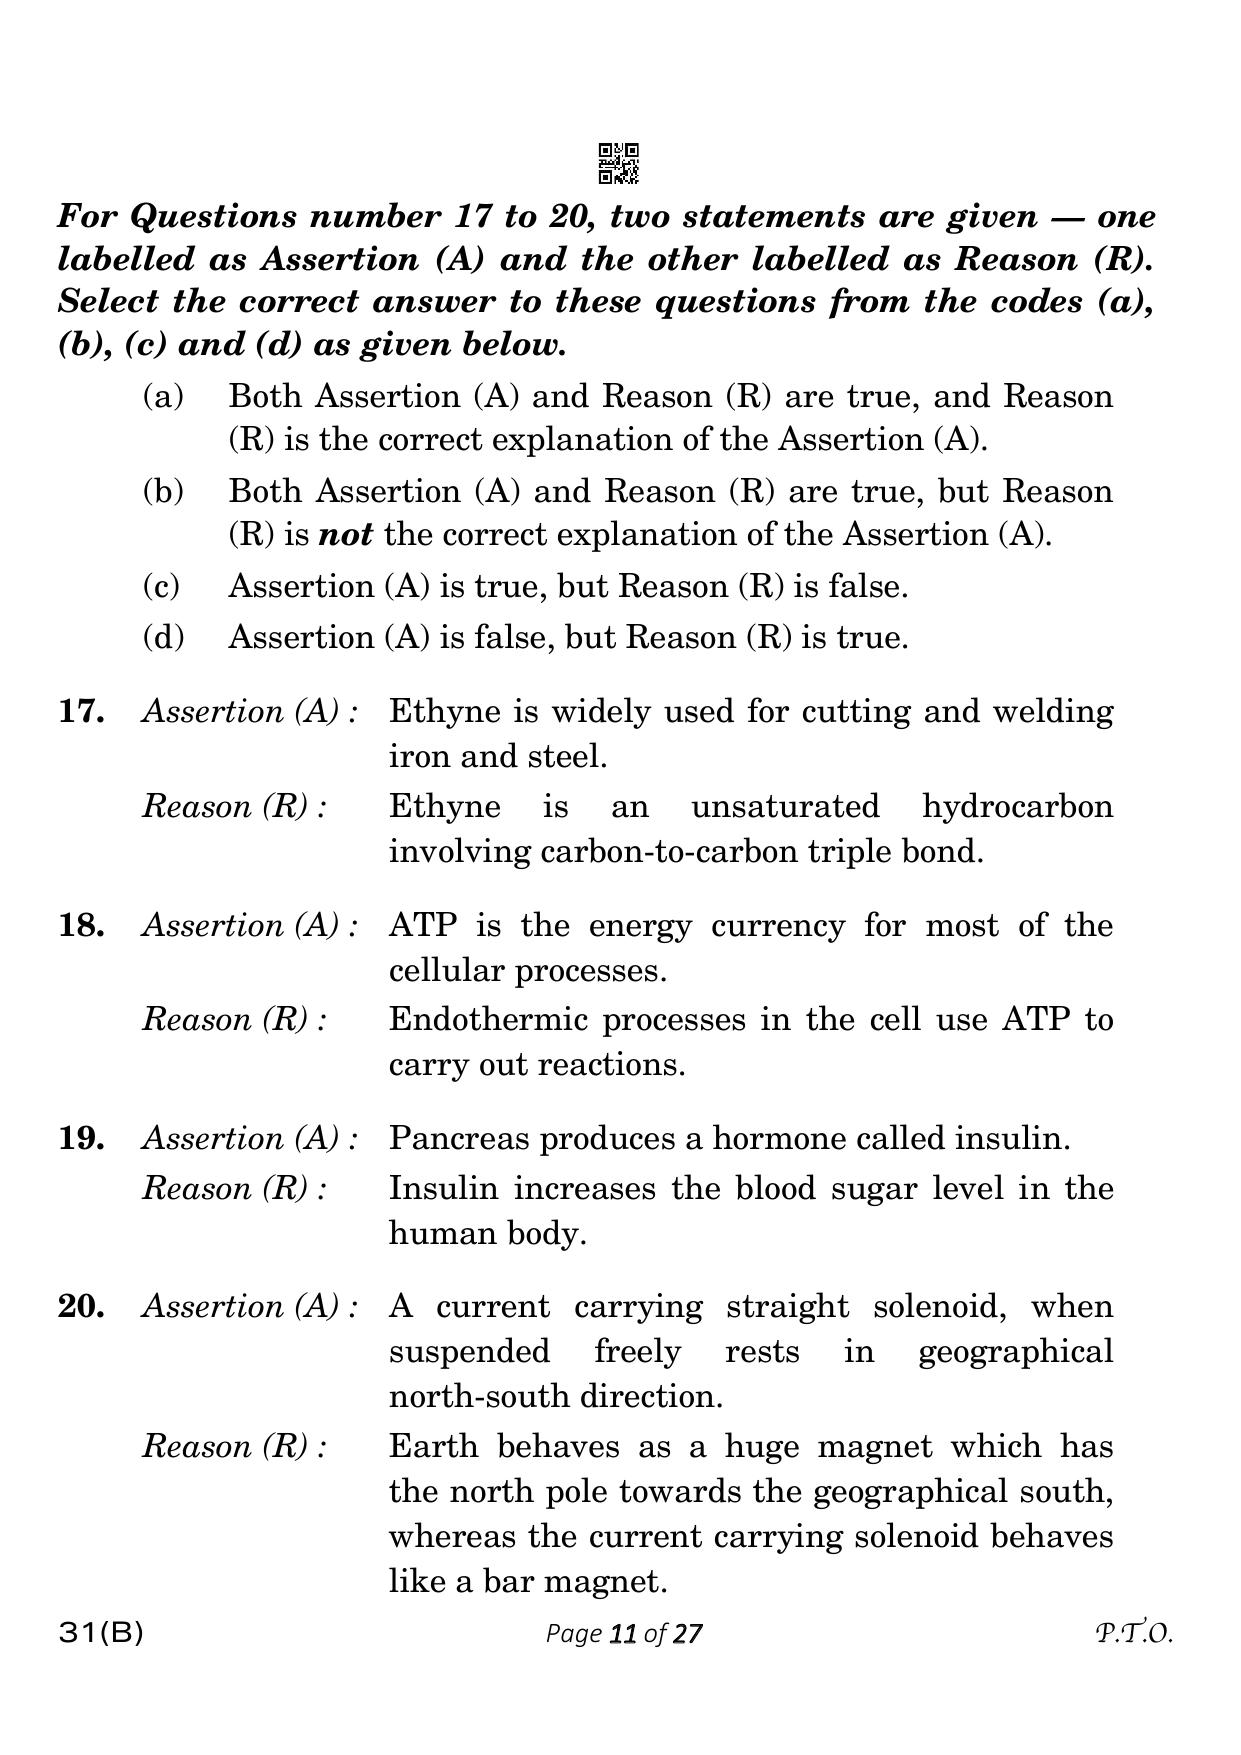 CBSE Class 10 31-B Science 2023 (Compartment) Question Paper - Page 11